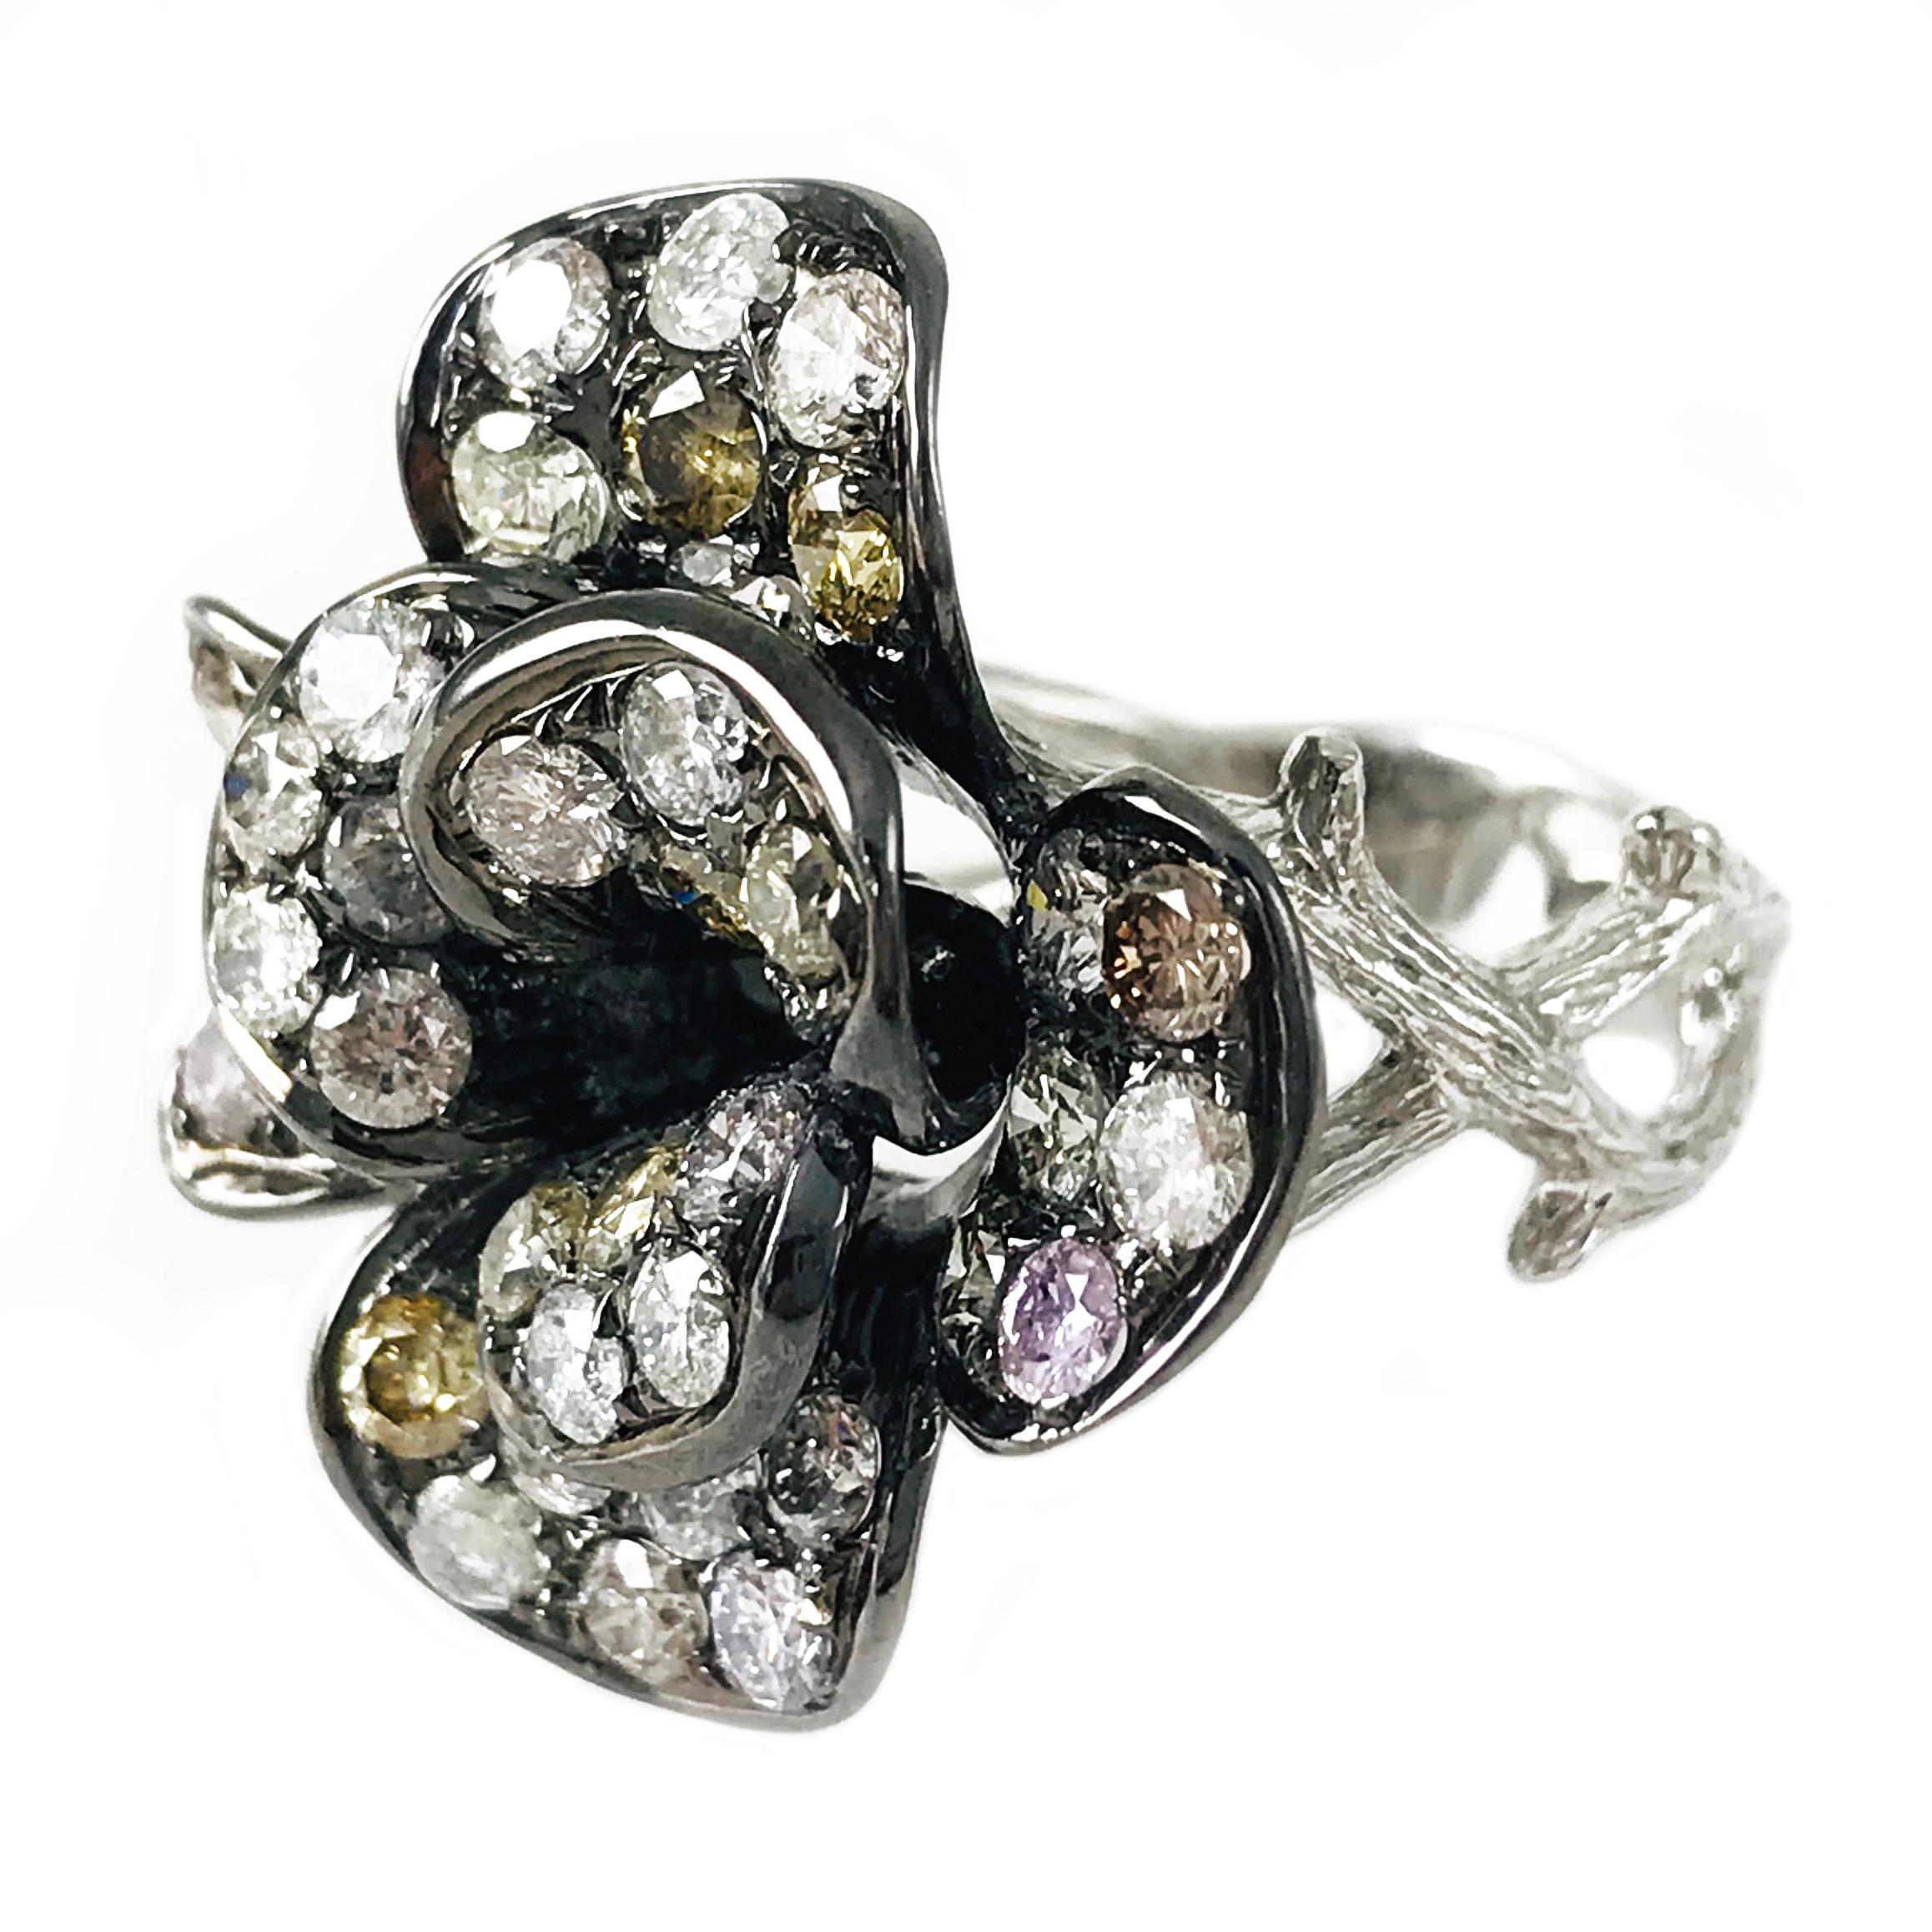 Two-Tone 14 Karat Diamond Flower Ring with a black Rhodium finish to accent the different hues in the natural diamonds. The unique and lovely ring features two tiers of flower pedals with white, pink, yellow and champagne diamonds. The shank is 14